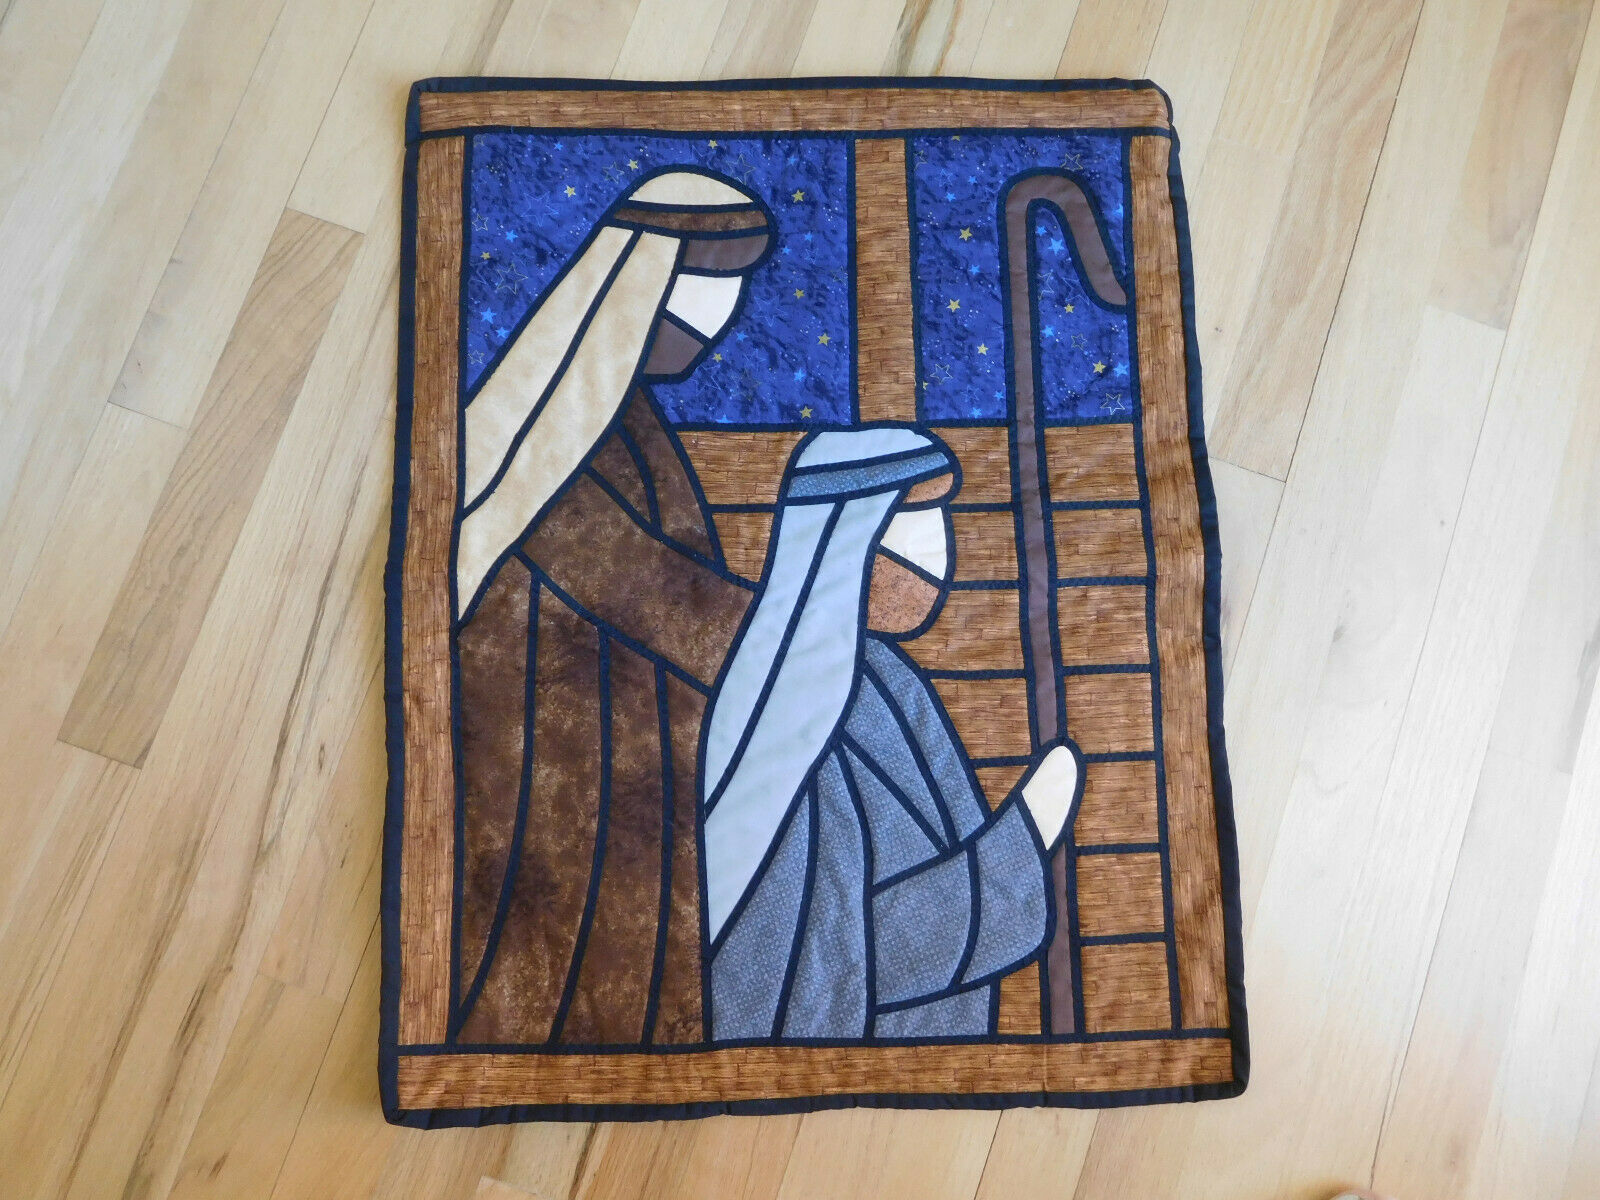 Christmas Stain Glass Fabric Finished Wall Quilt Nativity 2 Shepherds 21x26"